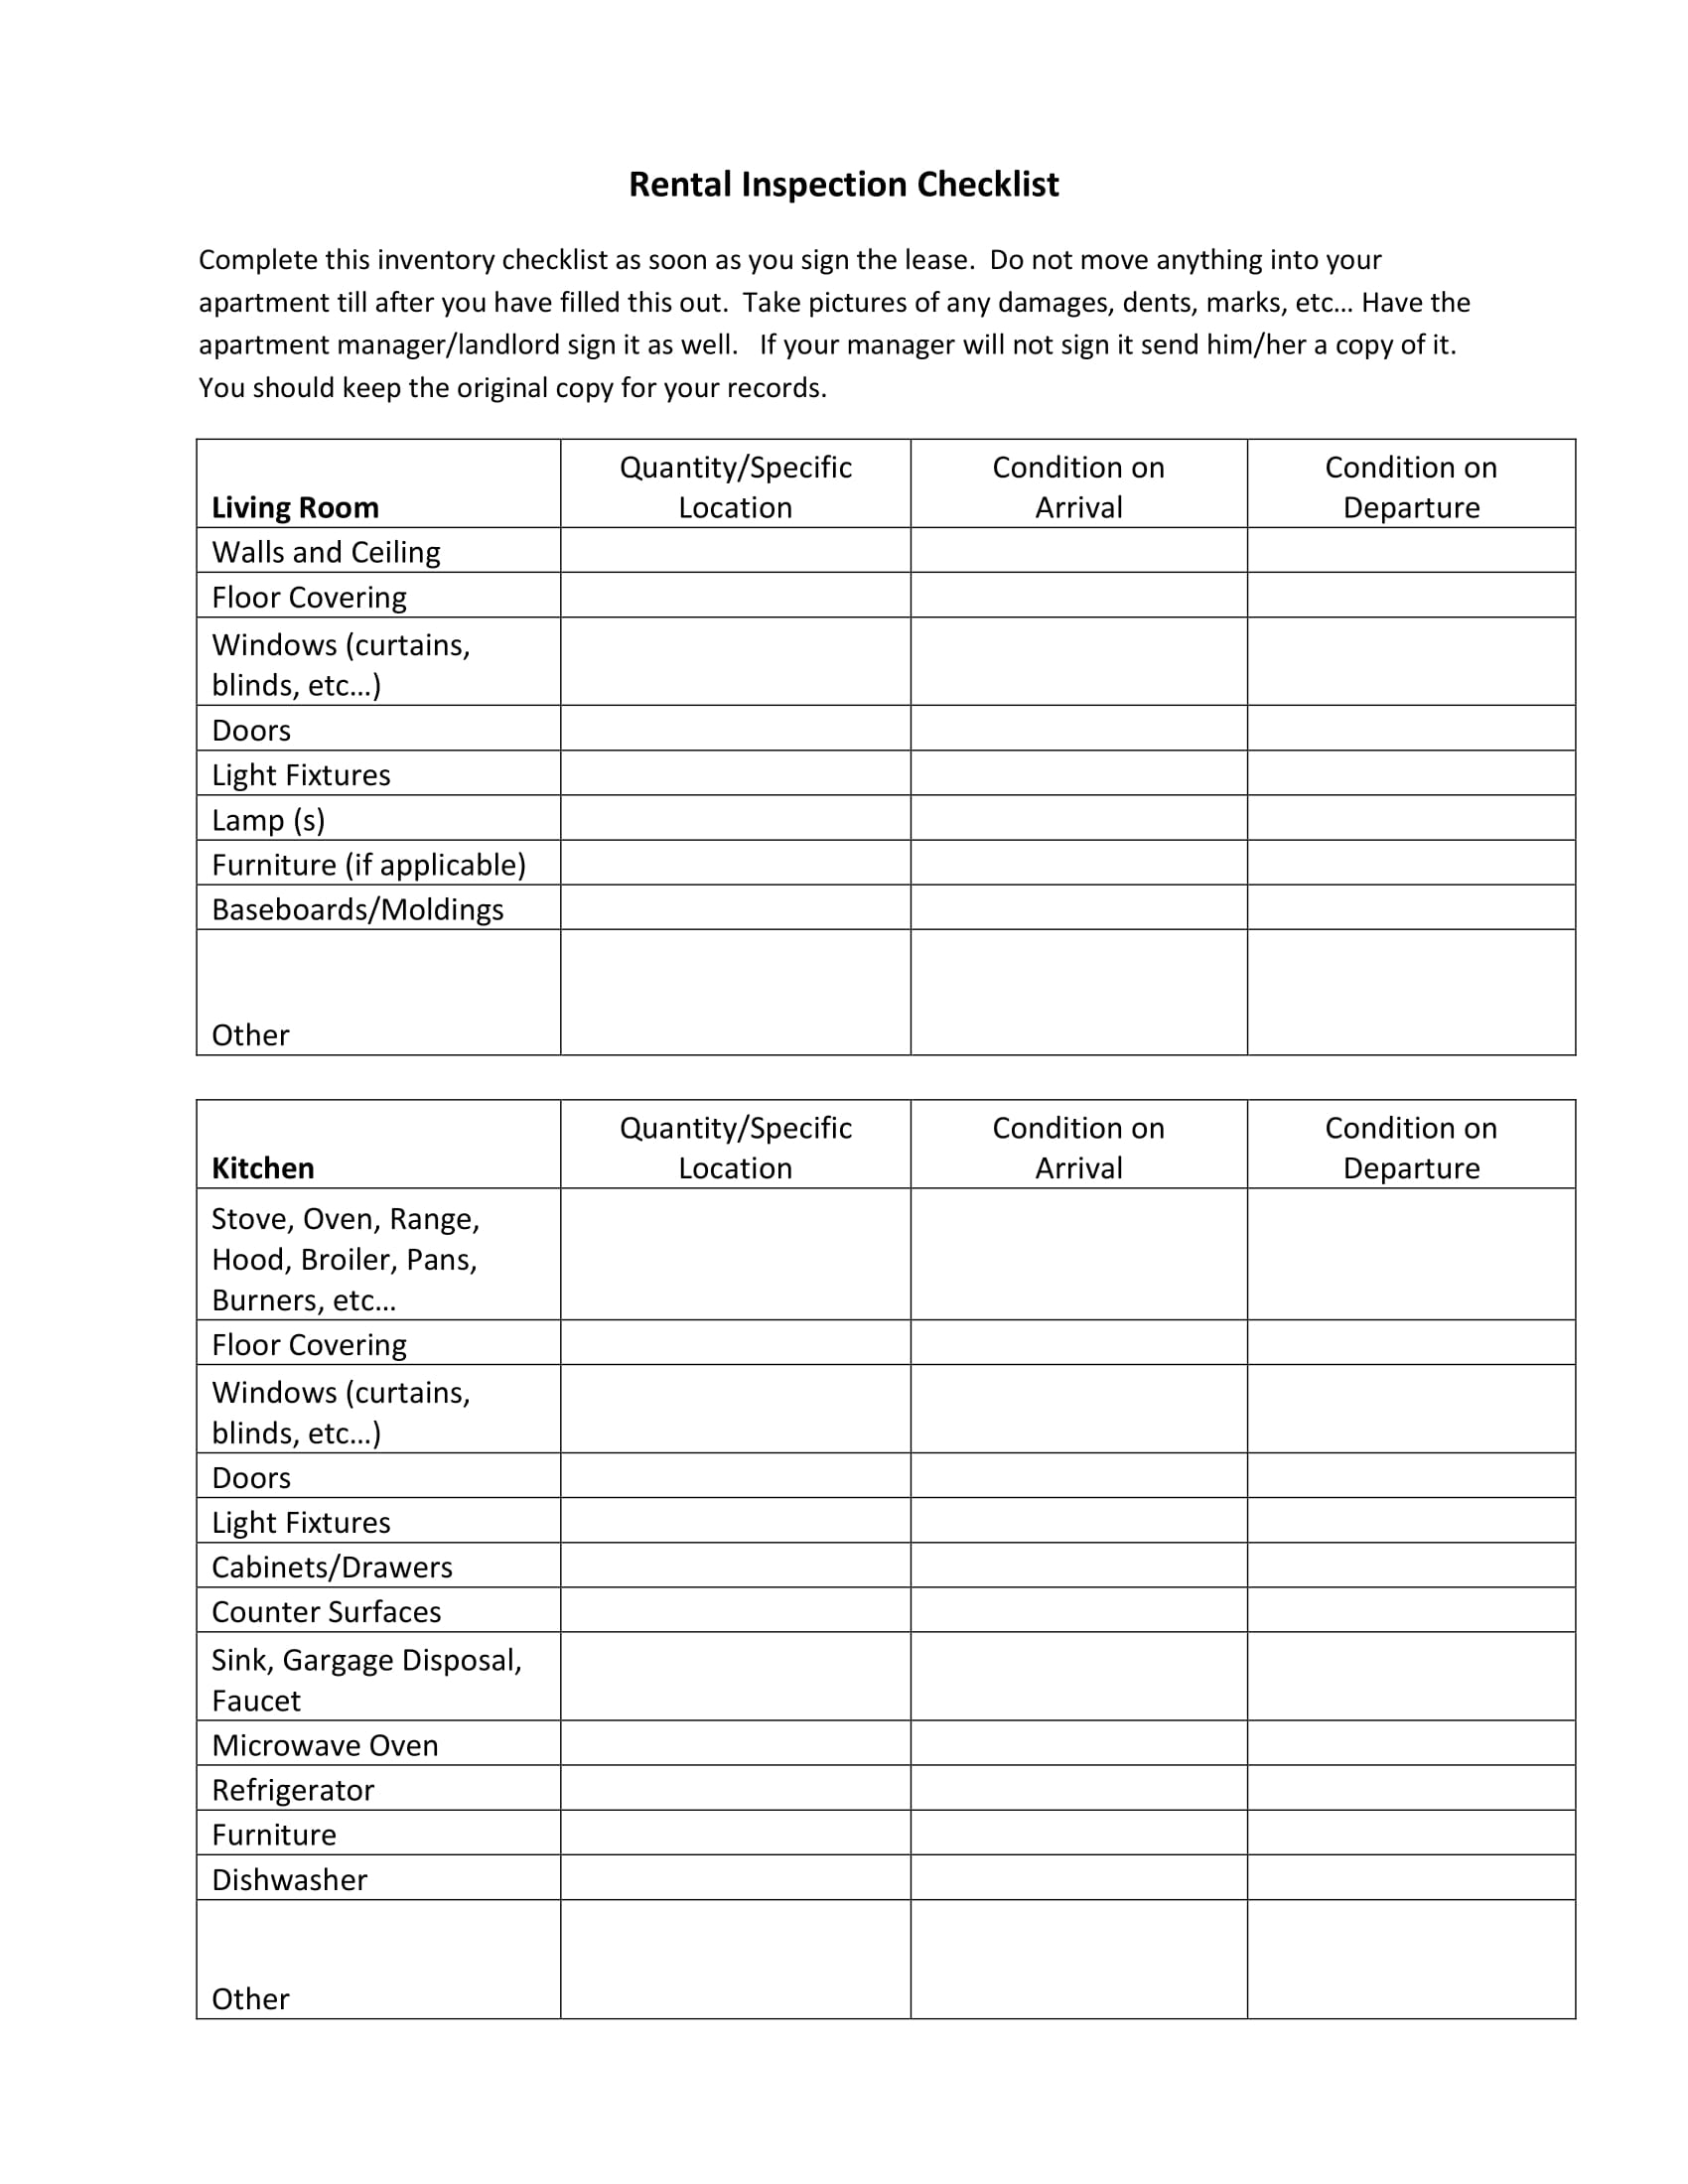 10+ Rental Checklist Examples - PDF  Examples For Condition Of Rental Property Checklist Template In Condition Of Rental Property Checklist Template